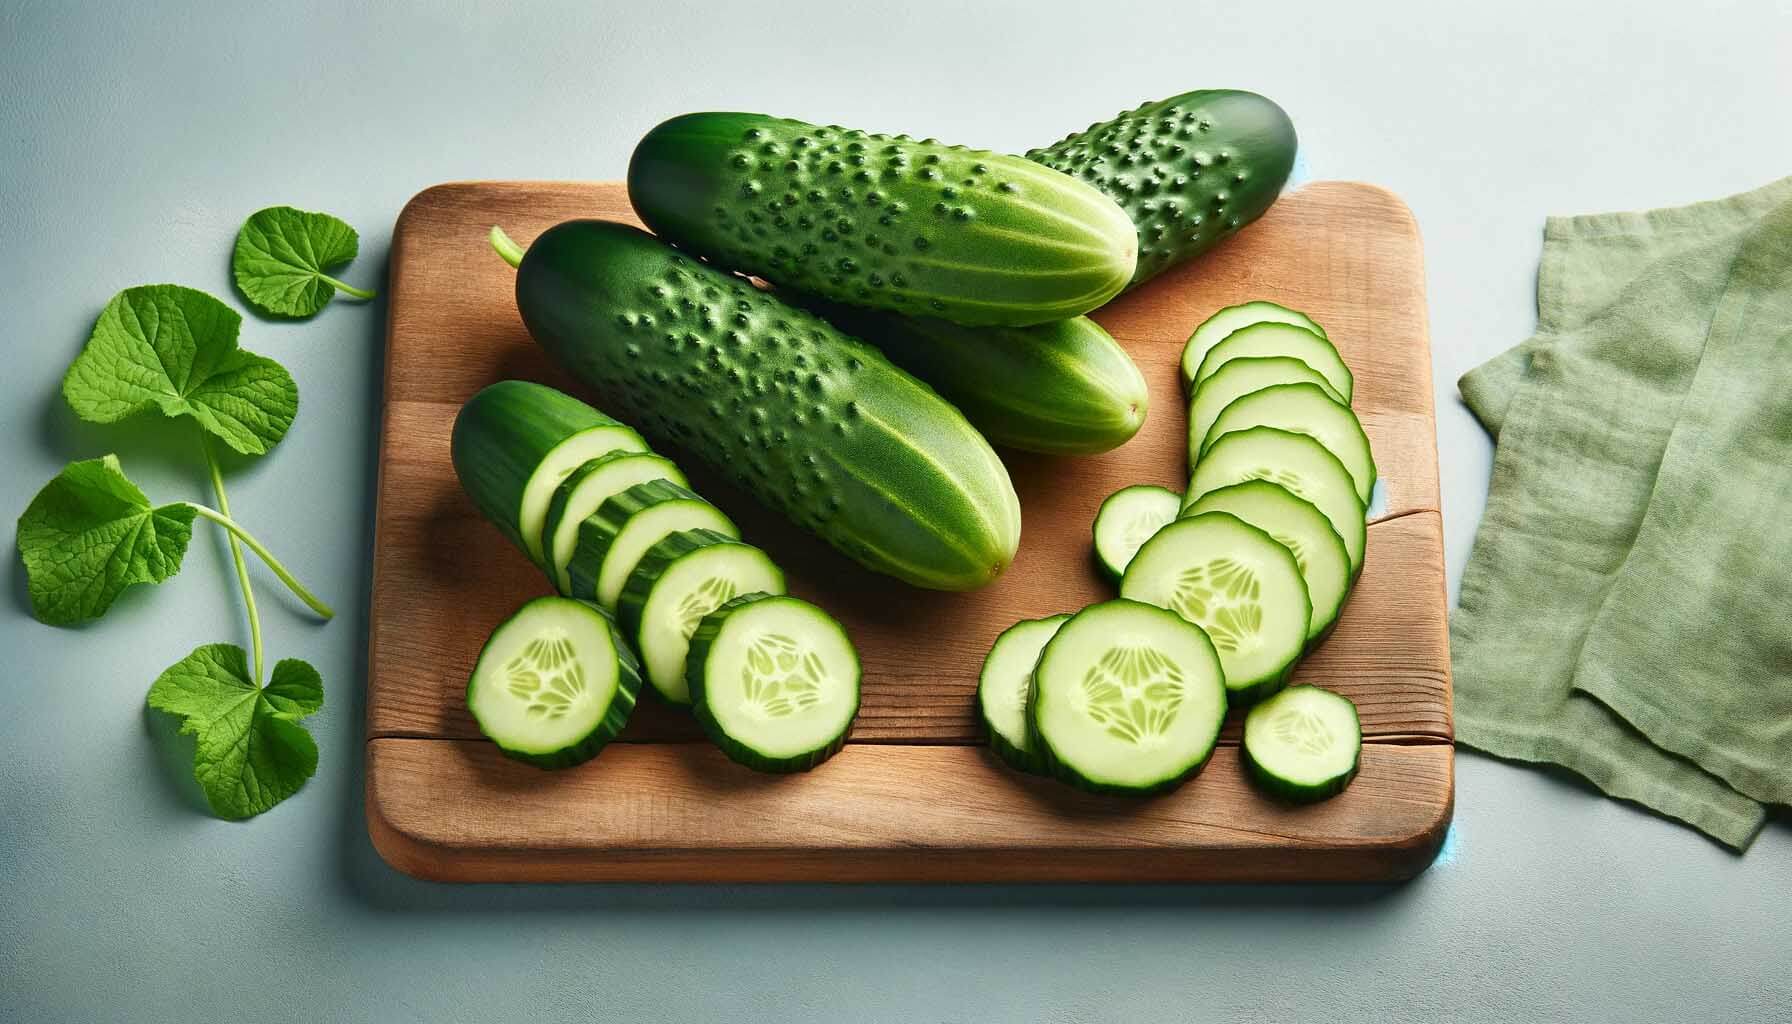 What happens if I eat only cucumbers